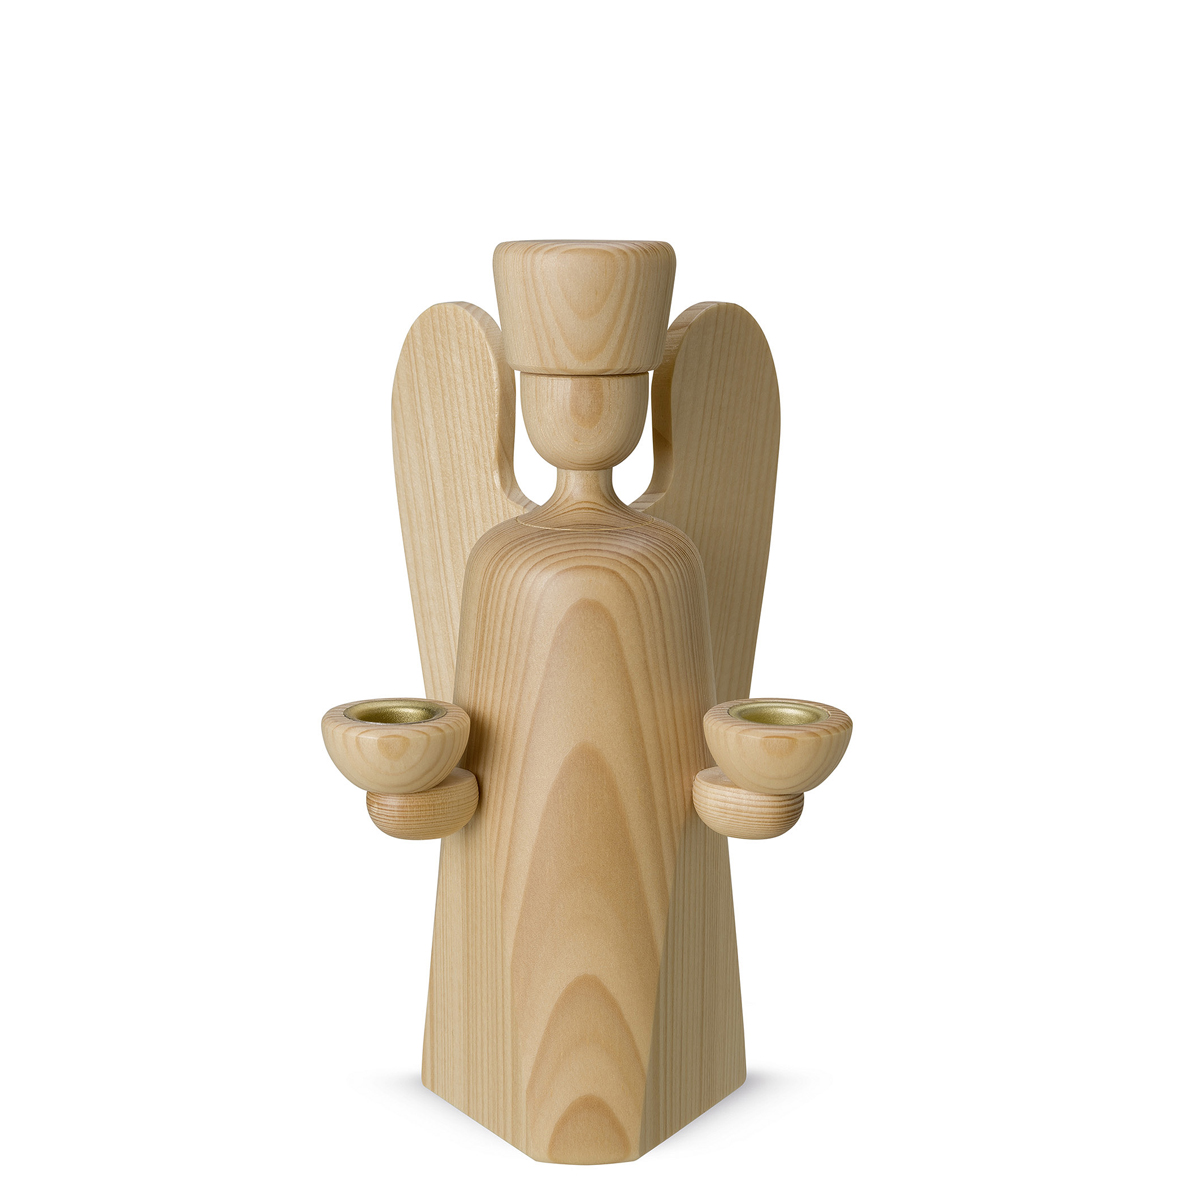 Angel candle holder, small, natural wood